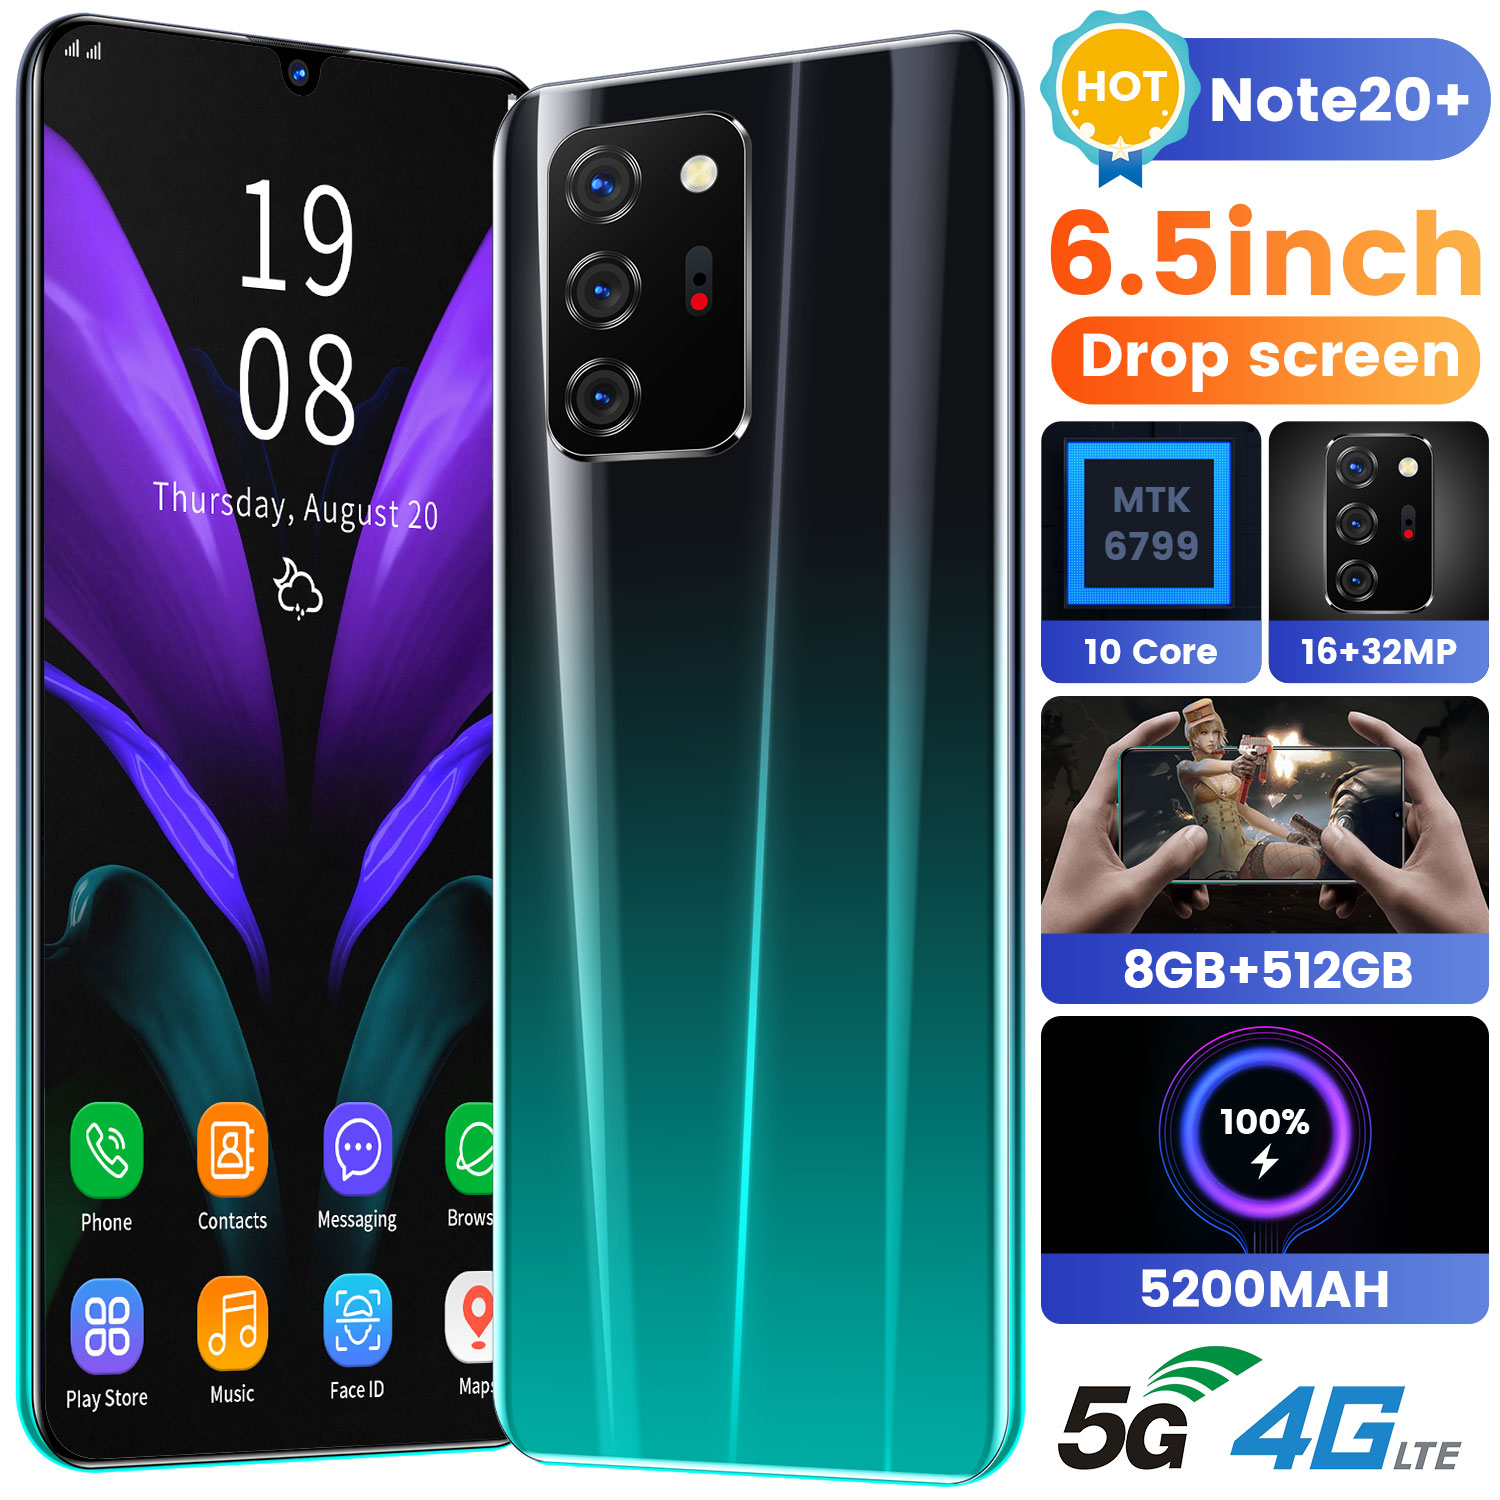 Note20+ Smartphone Bluetooth Mobile Bluetooth 4G/5G Network Face Recognition โทรศัพท์มือถือ มือถือ มือถือราคาถูก โทรศัพท์เกม รองรับสองซิม โทรศัพท์สมาร์ สมาร์ทโฟน